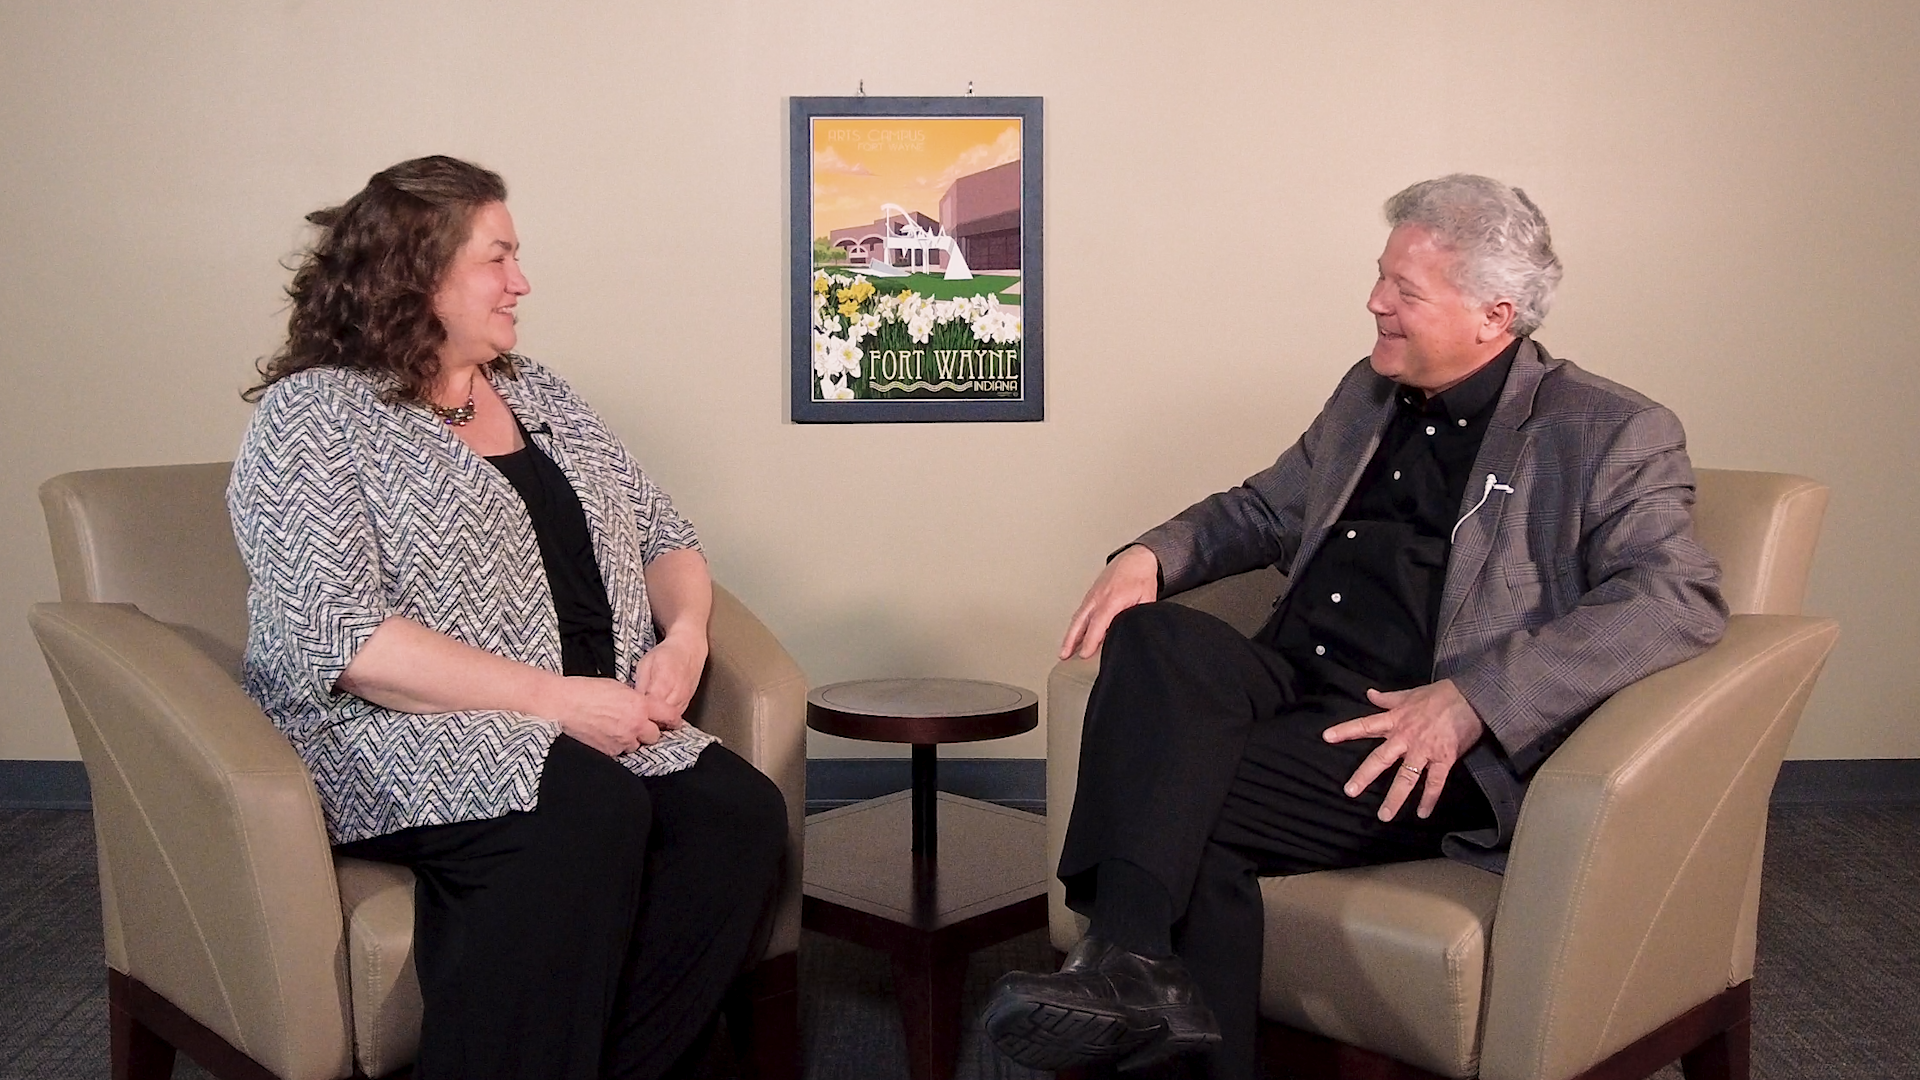 Kristen Guthrie, VP of Marketing and Communication at Visit Fort Wayne and Dan Ross of Arts United discuss the arts and culture scene in Fort Wayne.